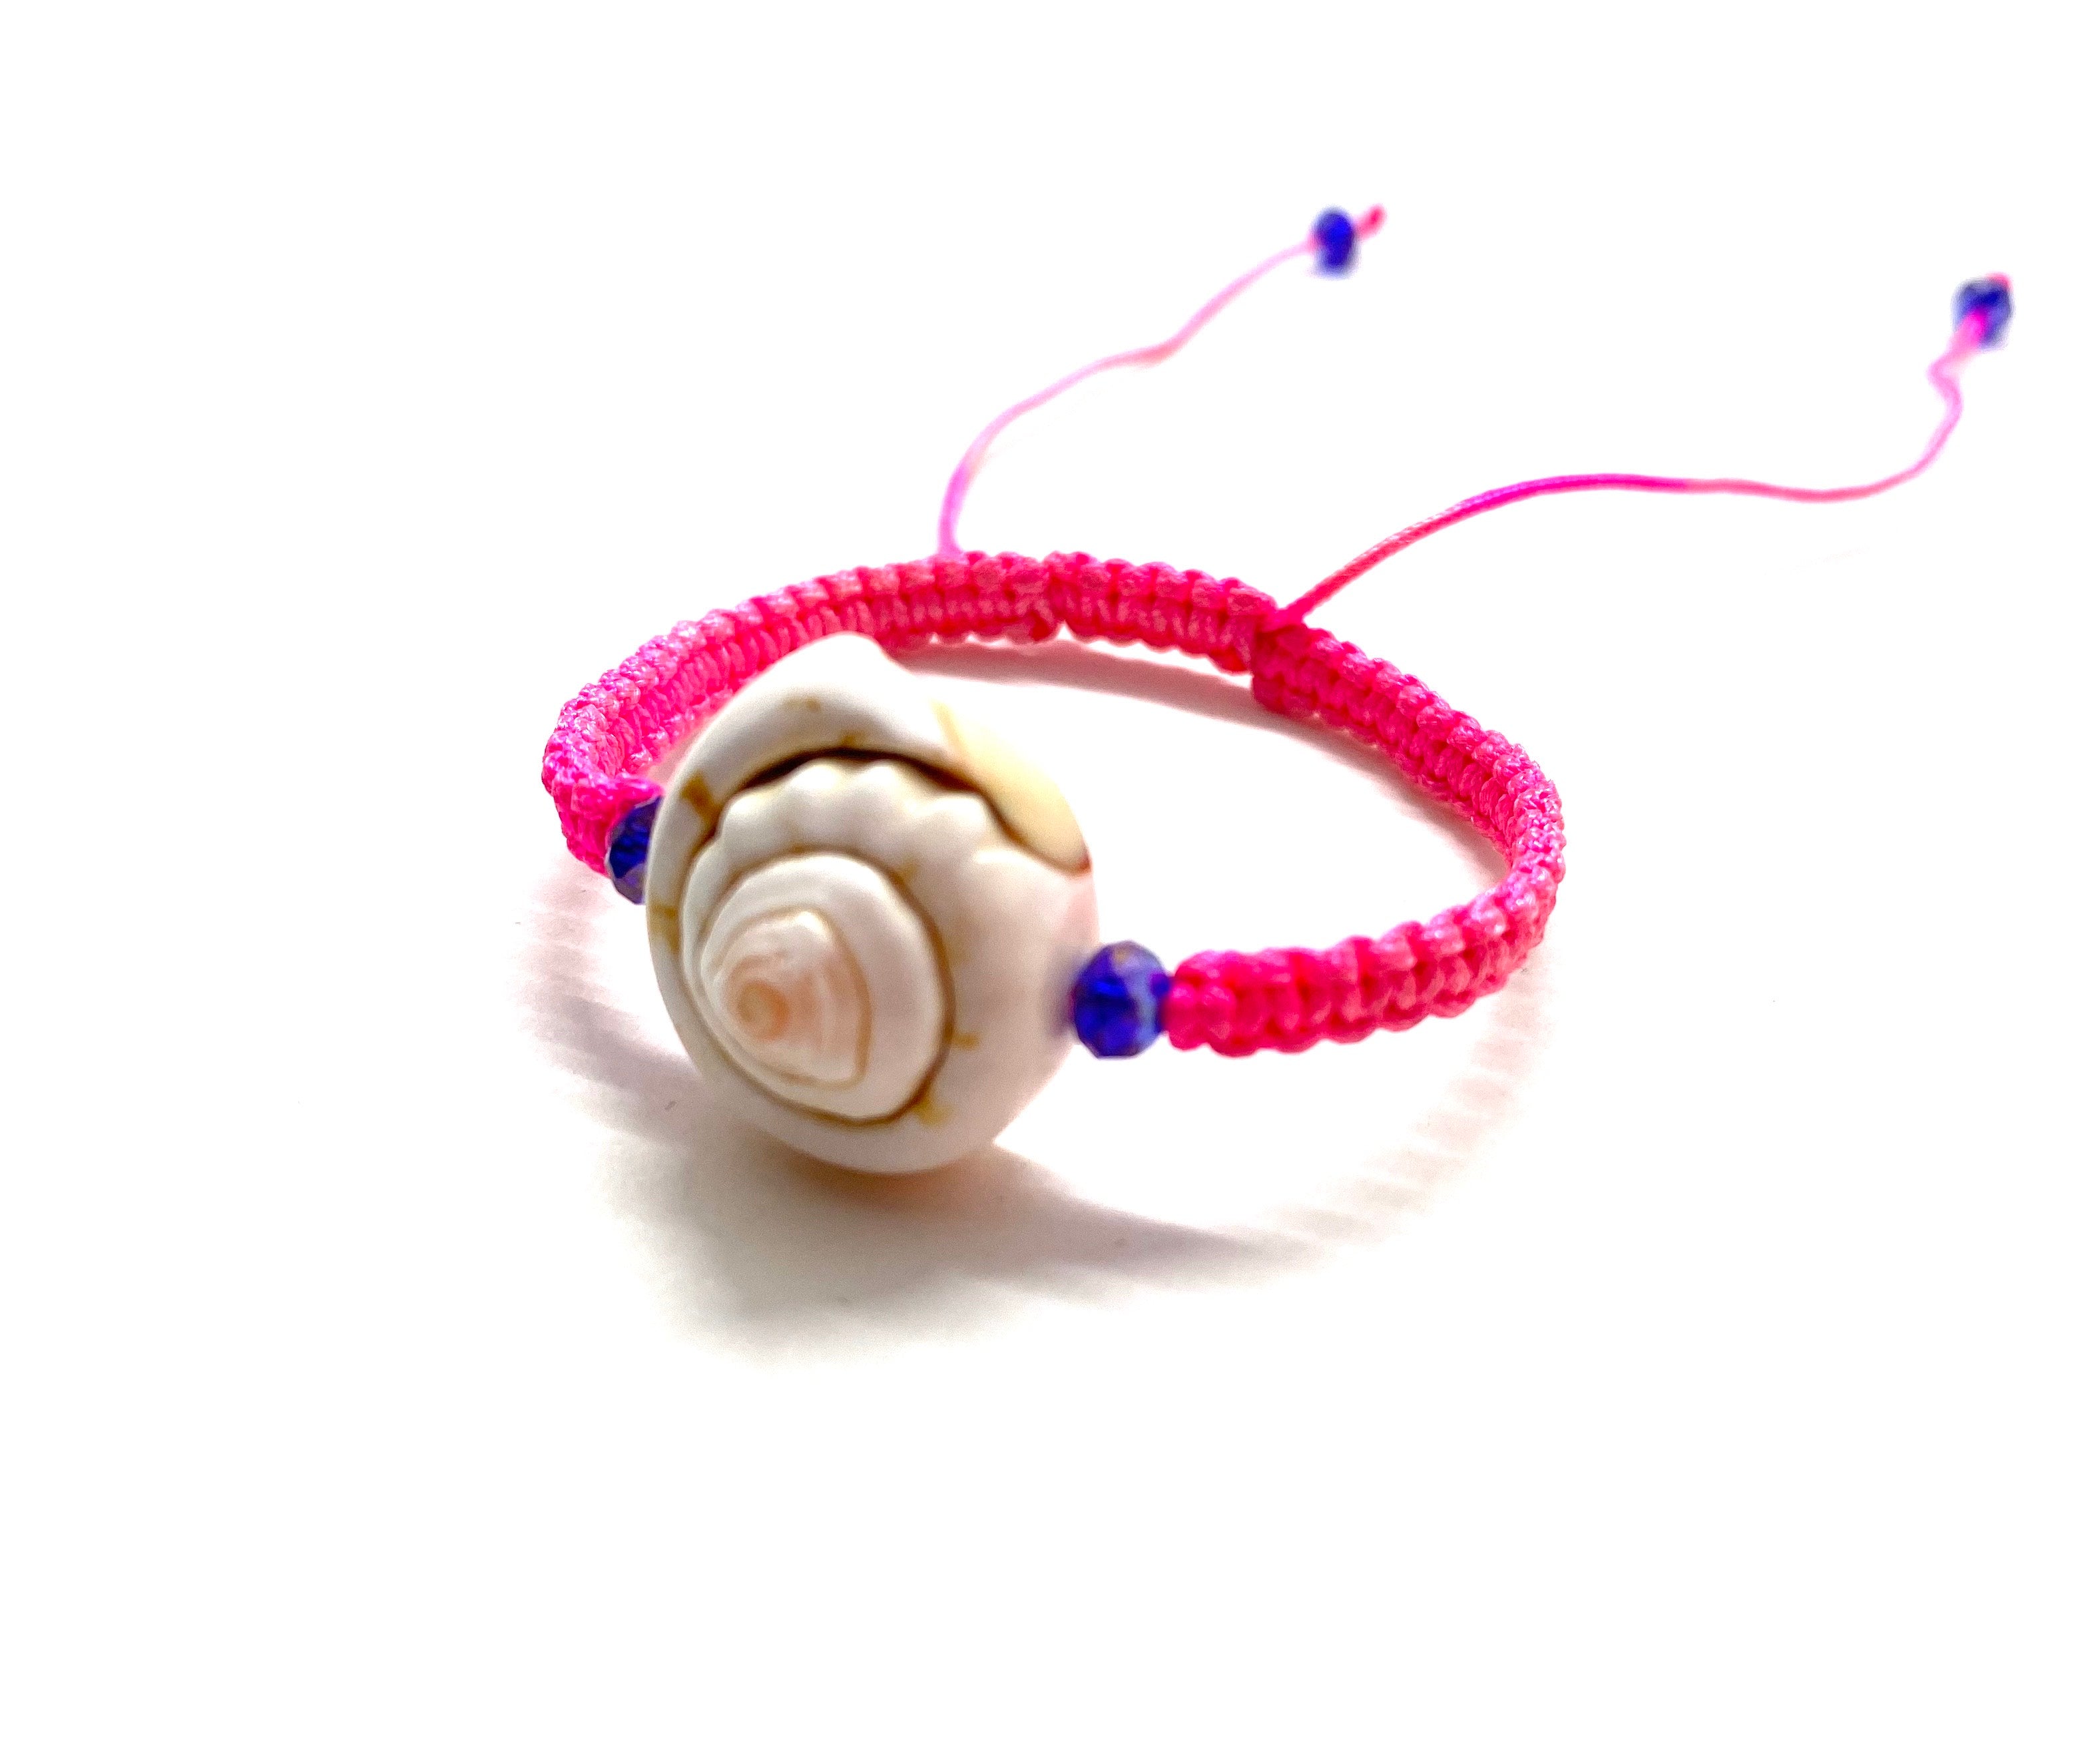 Baby bracelet seashell with purple Swarovski bead and pink fluo braided cord